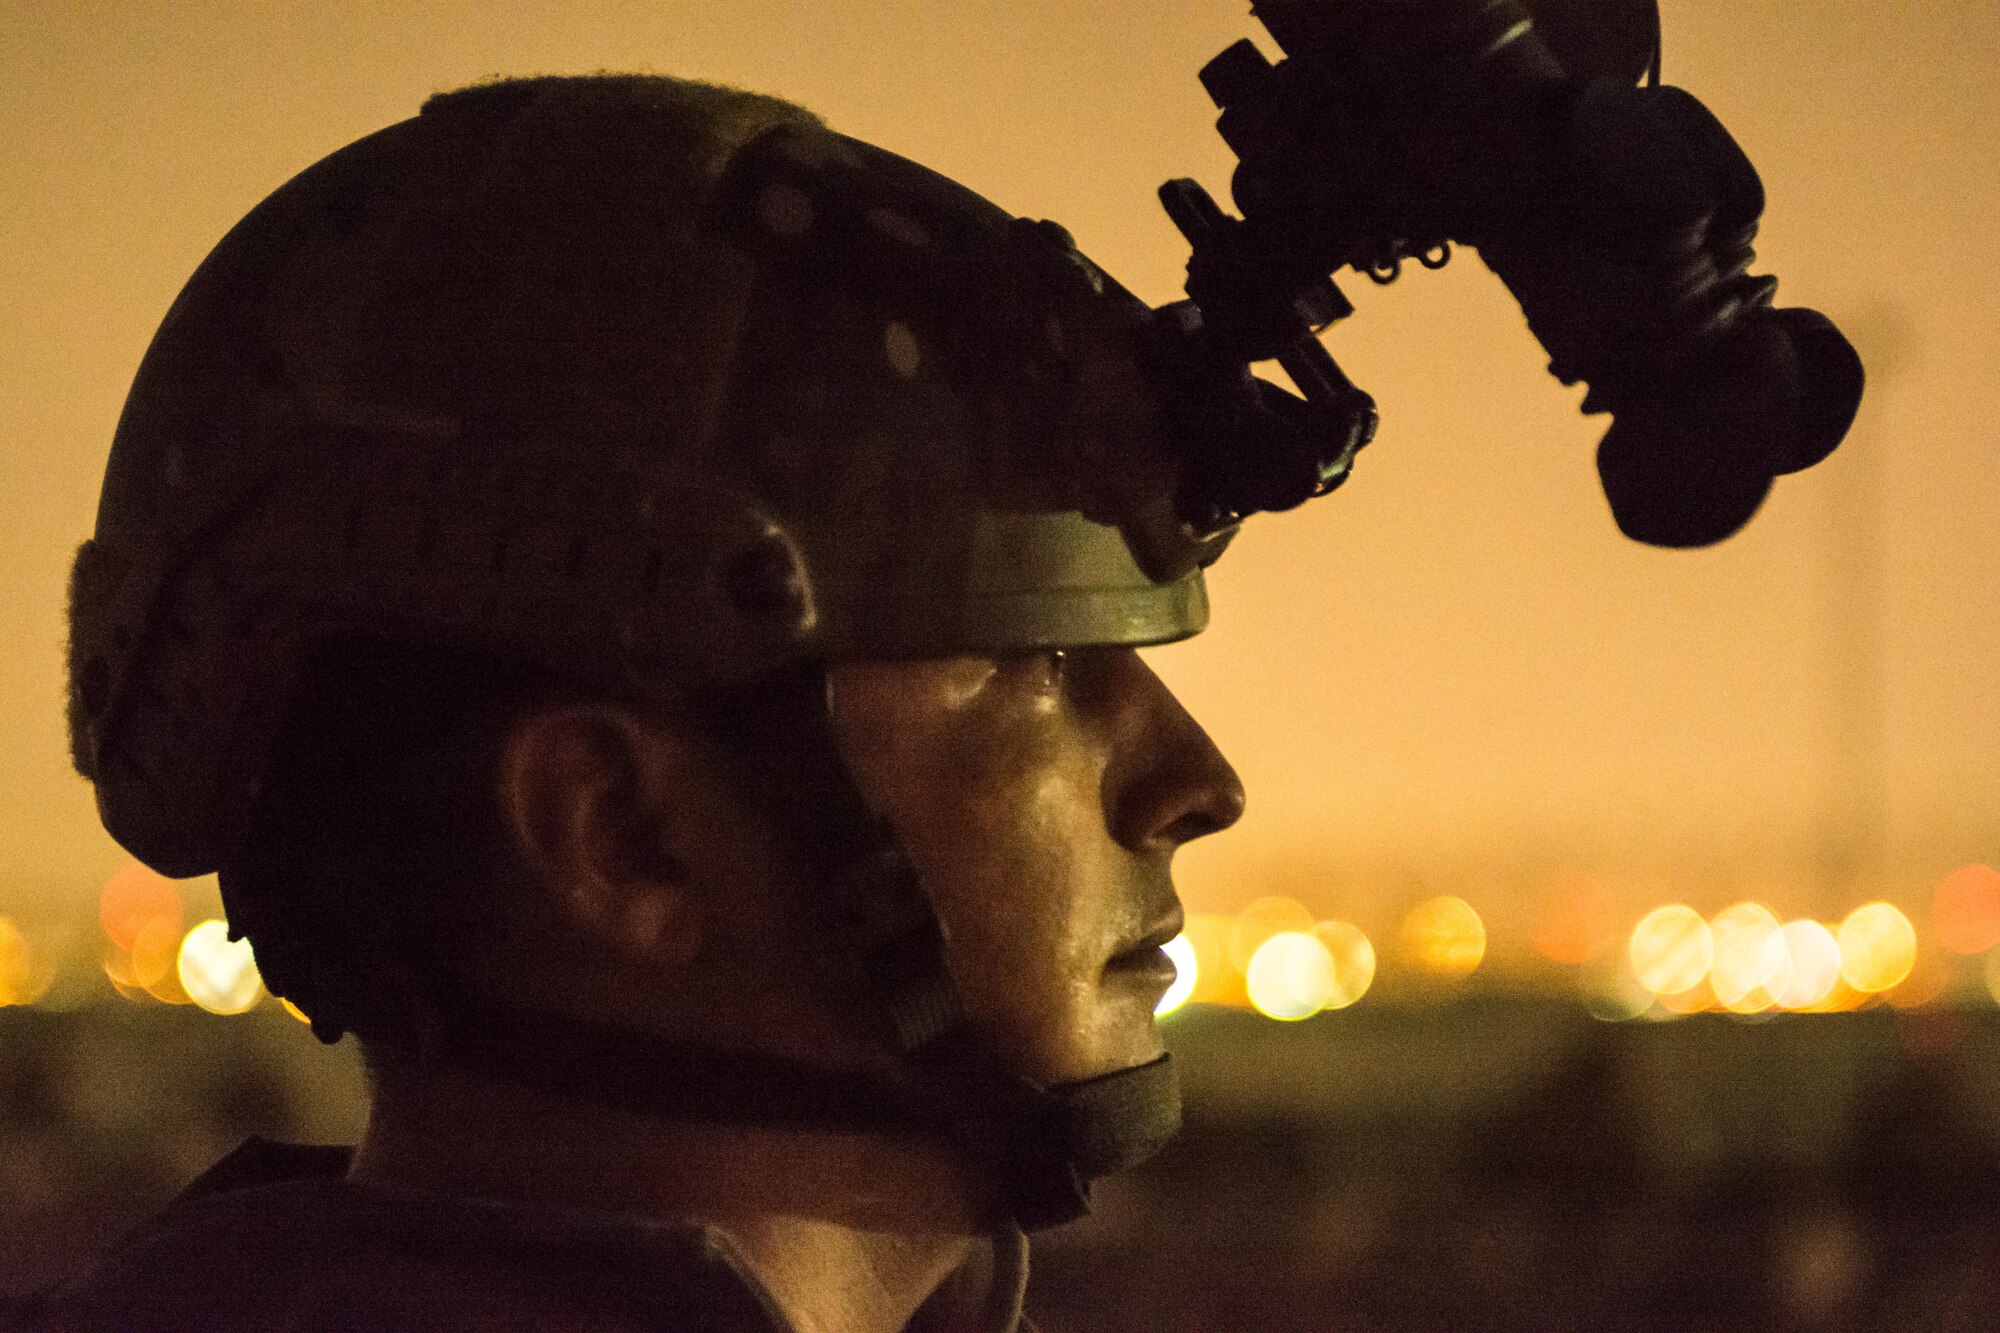 EOD technicians conduct night counter-IED training